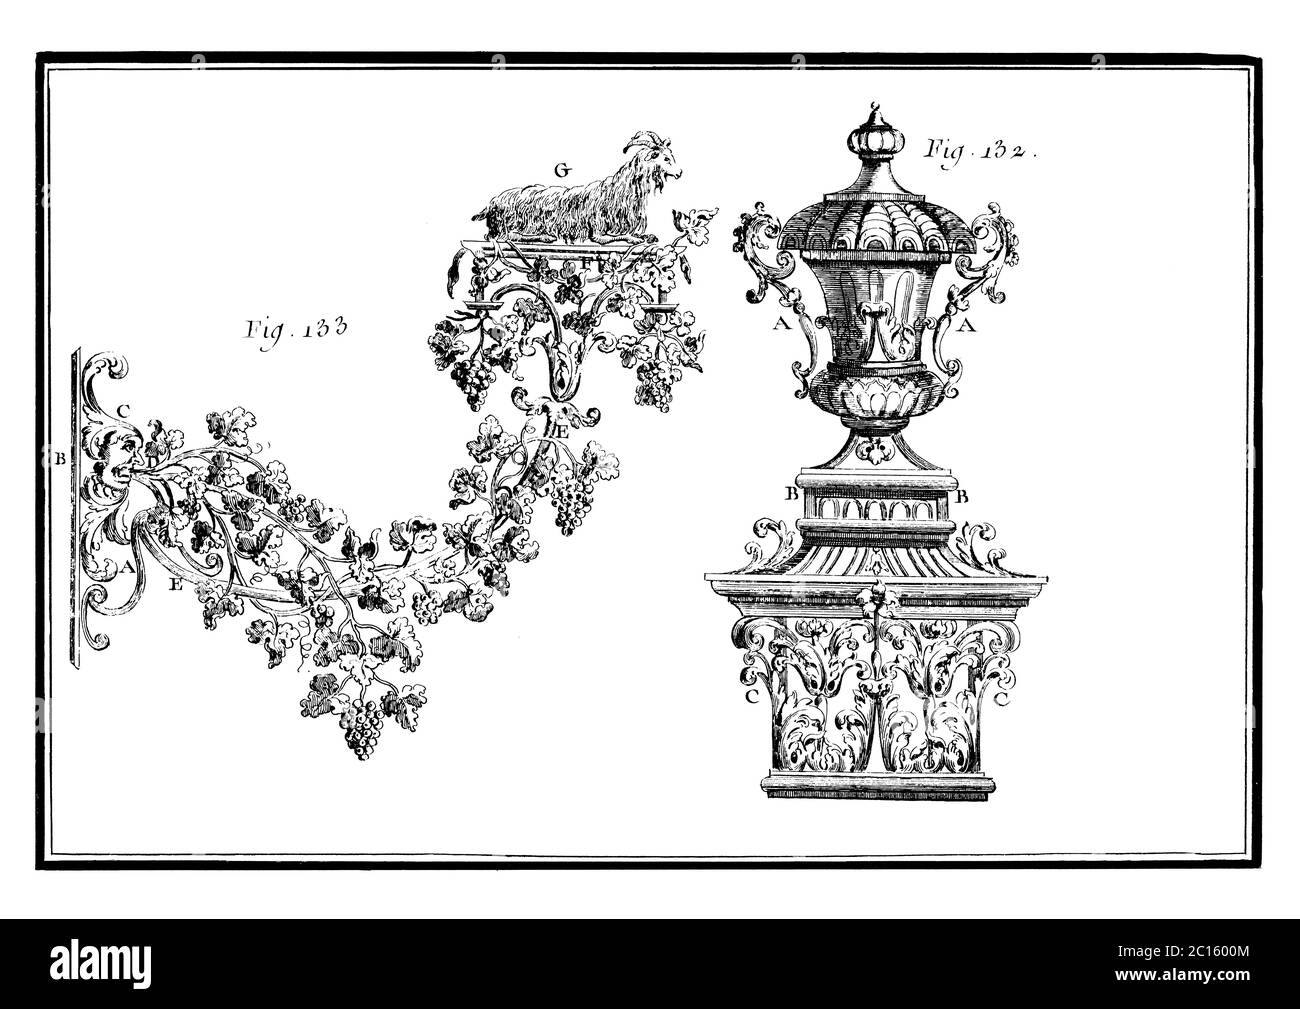 18th century illustration of a garden vase and signholder. Published in 'A Diderot Pictorial Encyclopedia of Trades and Industry. Manufacturing and th Stock Photo